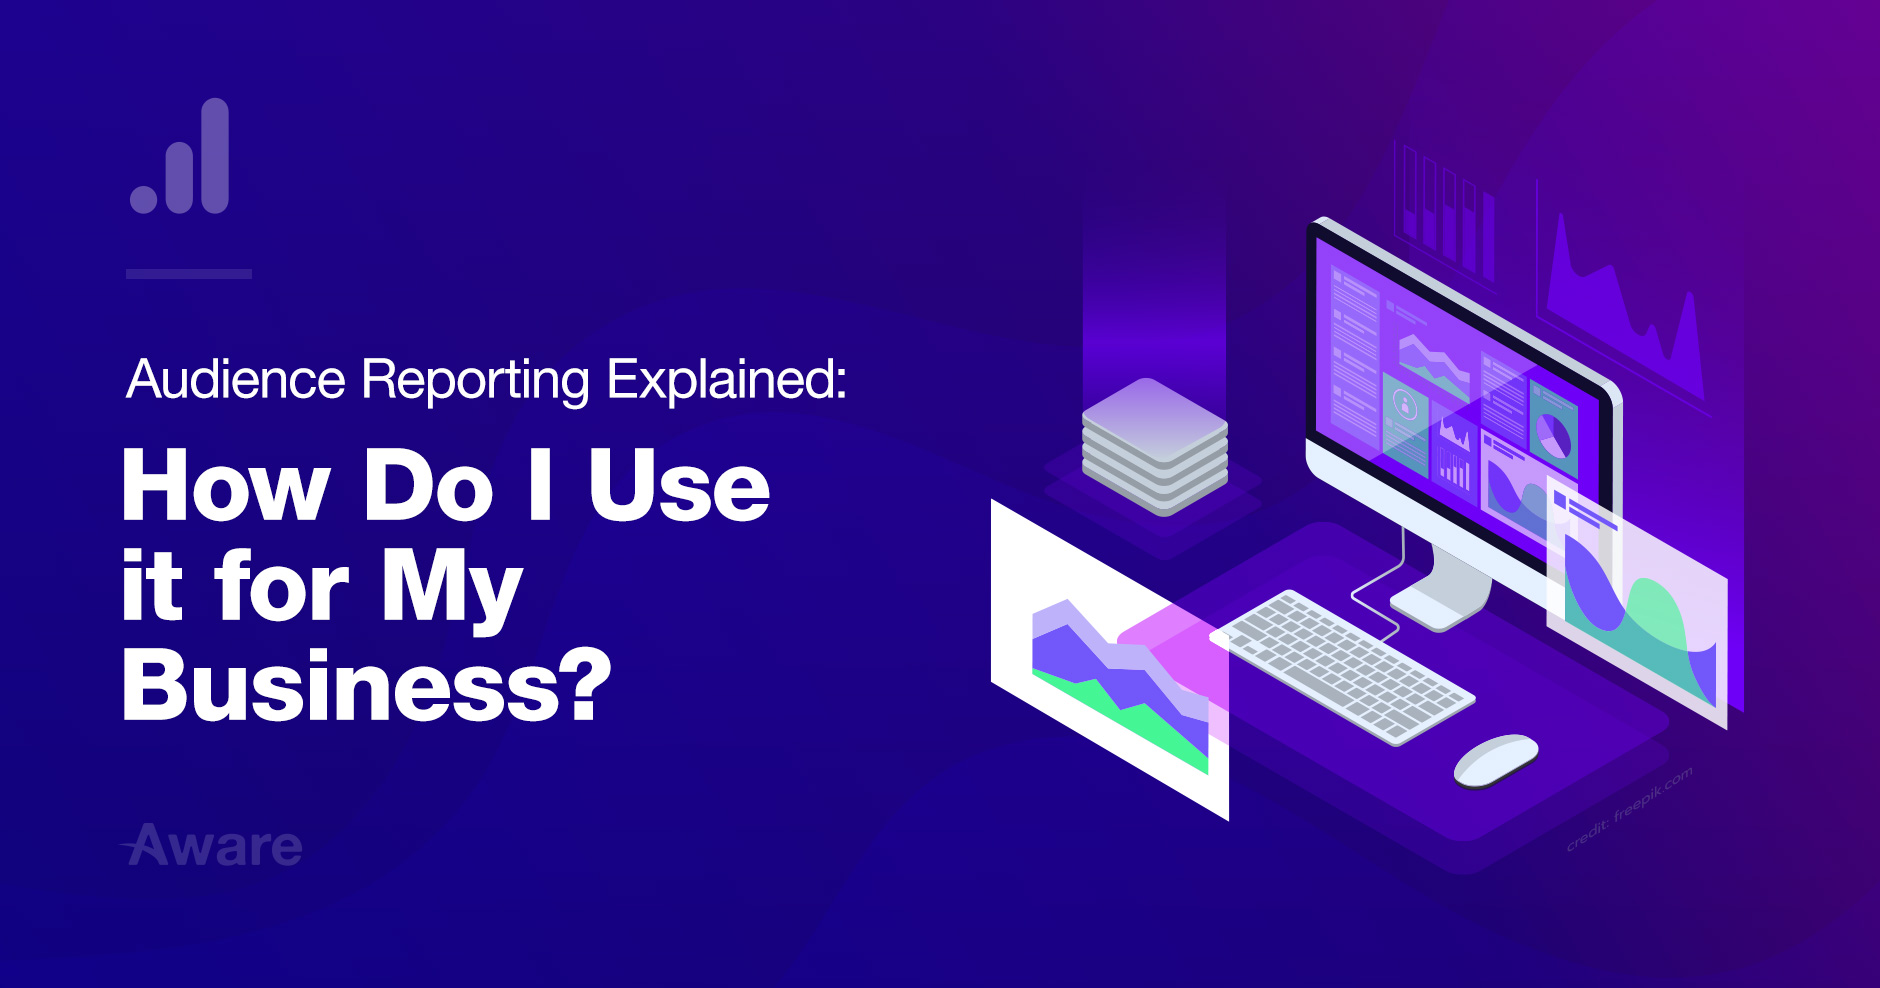 Audience Reporting Explained: How Do I Use it for My Business?